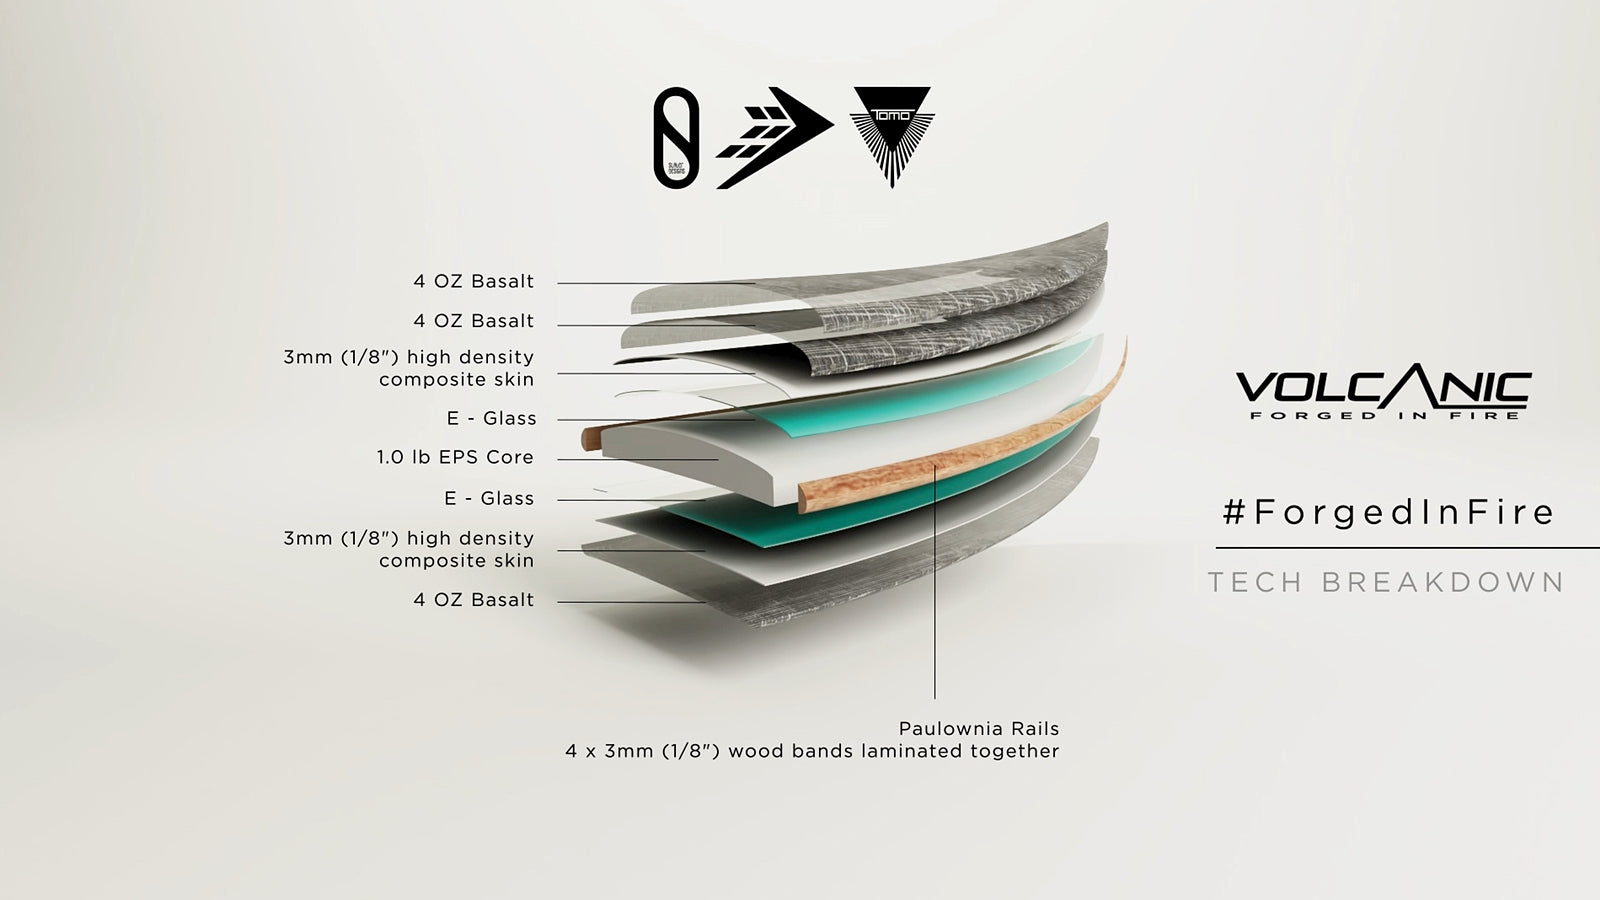 Firewire Surfboards introduces Volcanic Technology